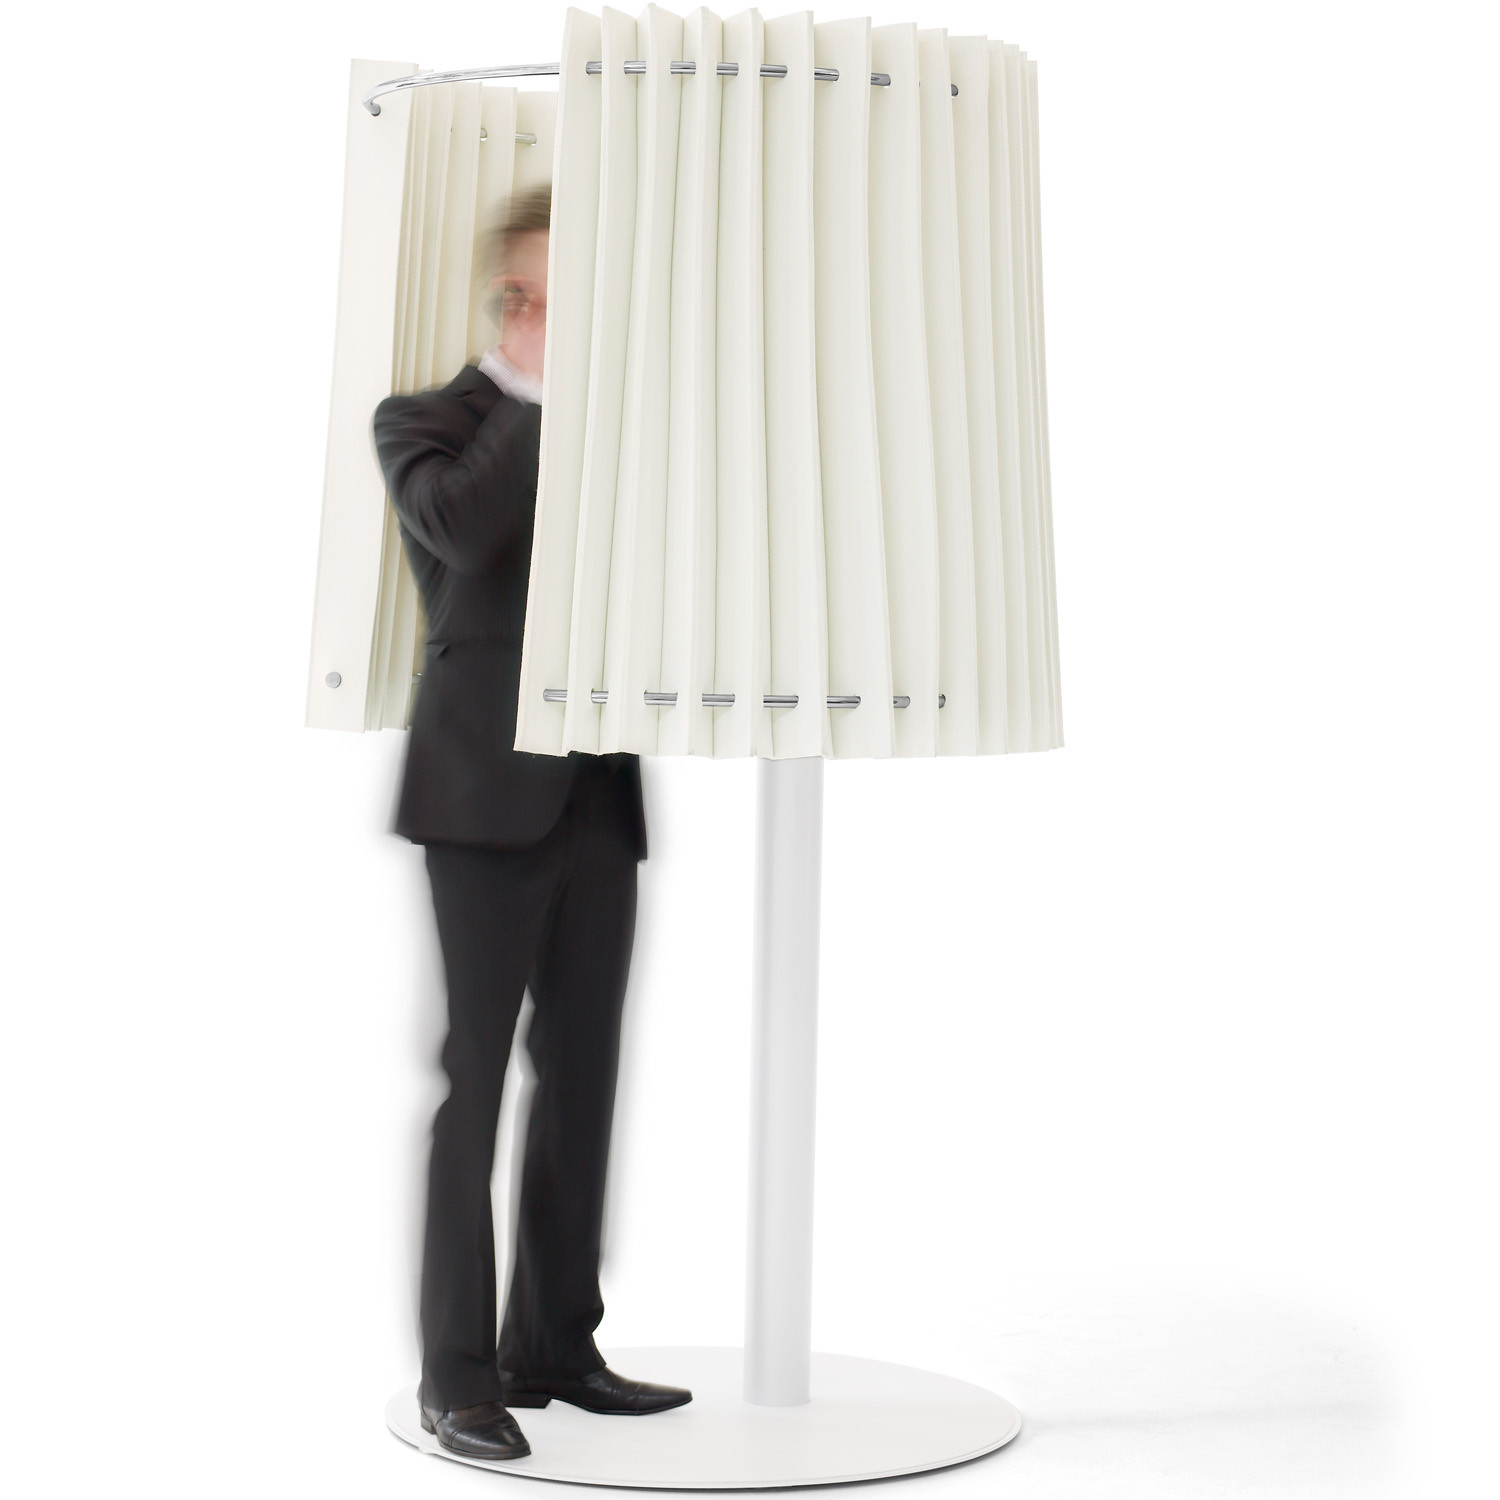 Smalltalk Acoustic Booth by Offecct